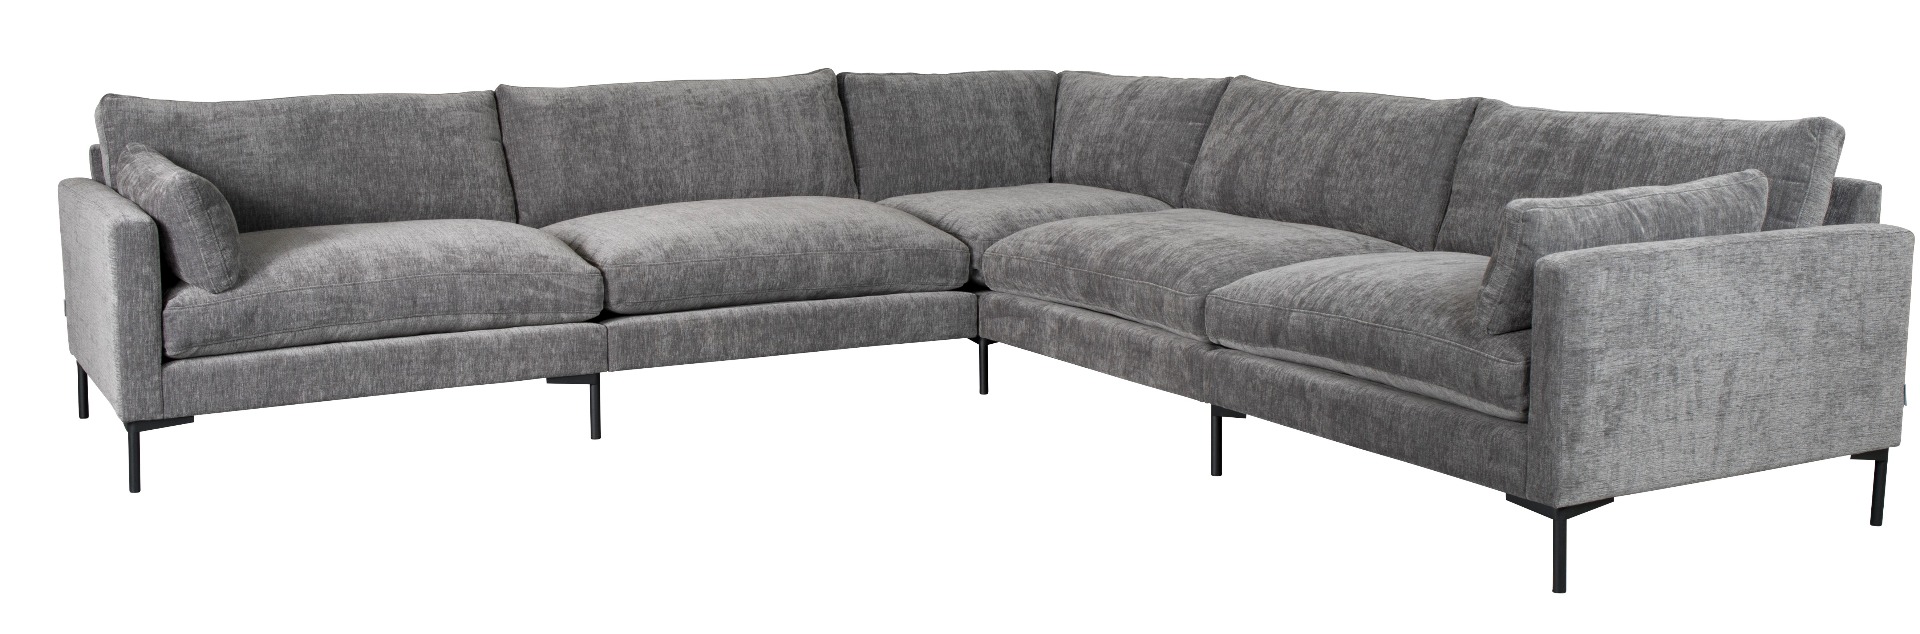 Sofa Summer 7 Seater in Anthracite